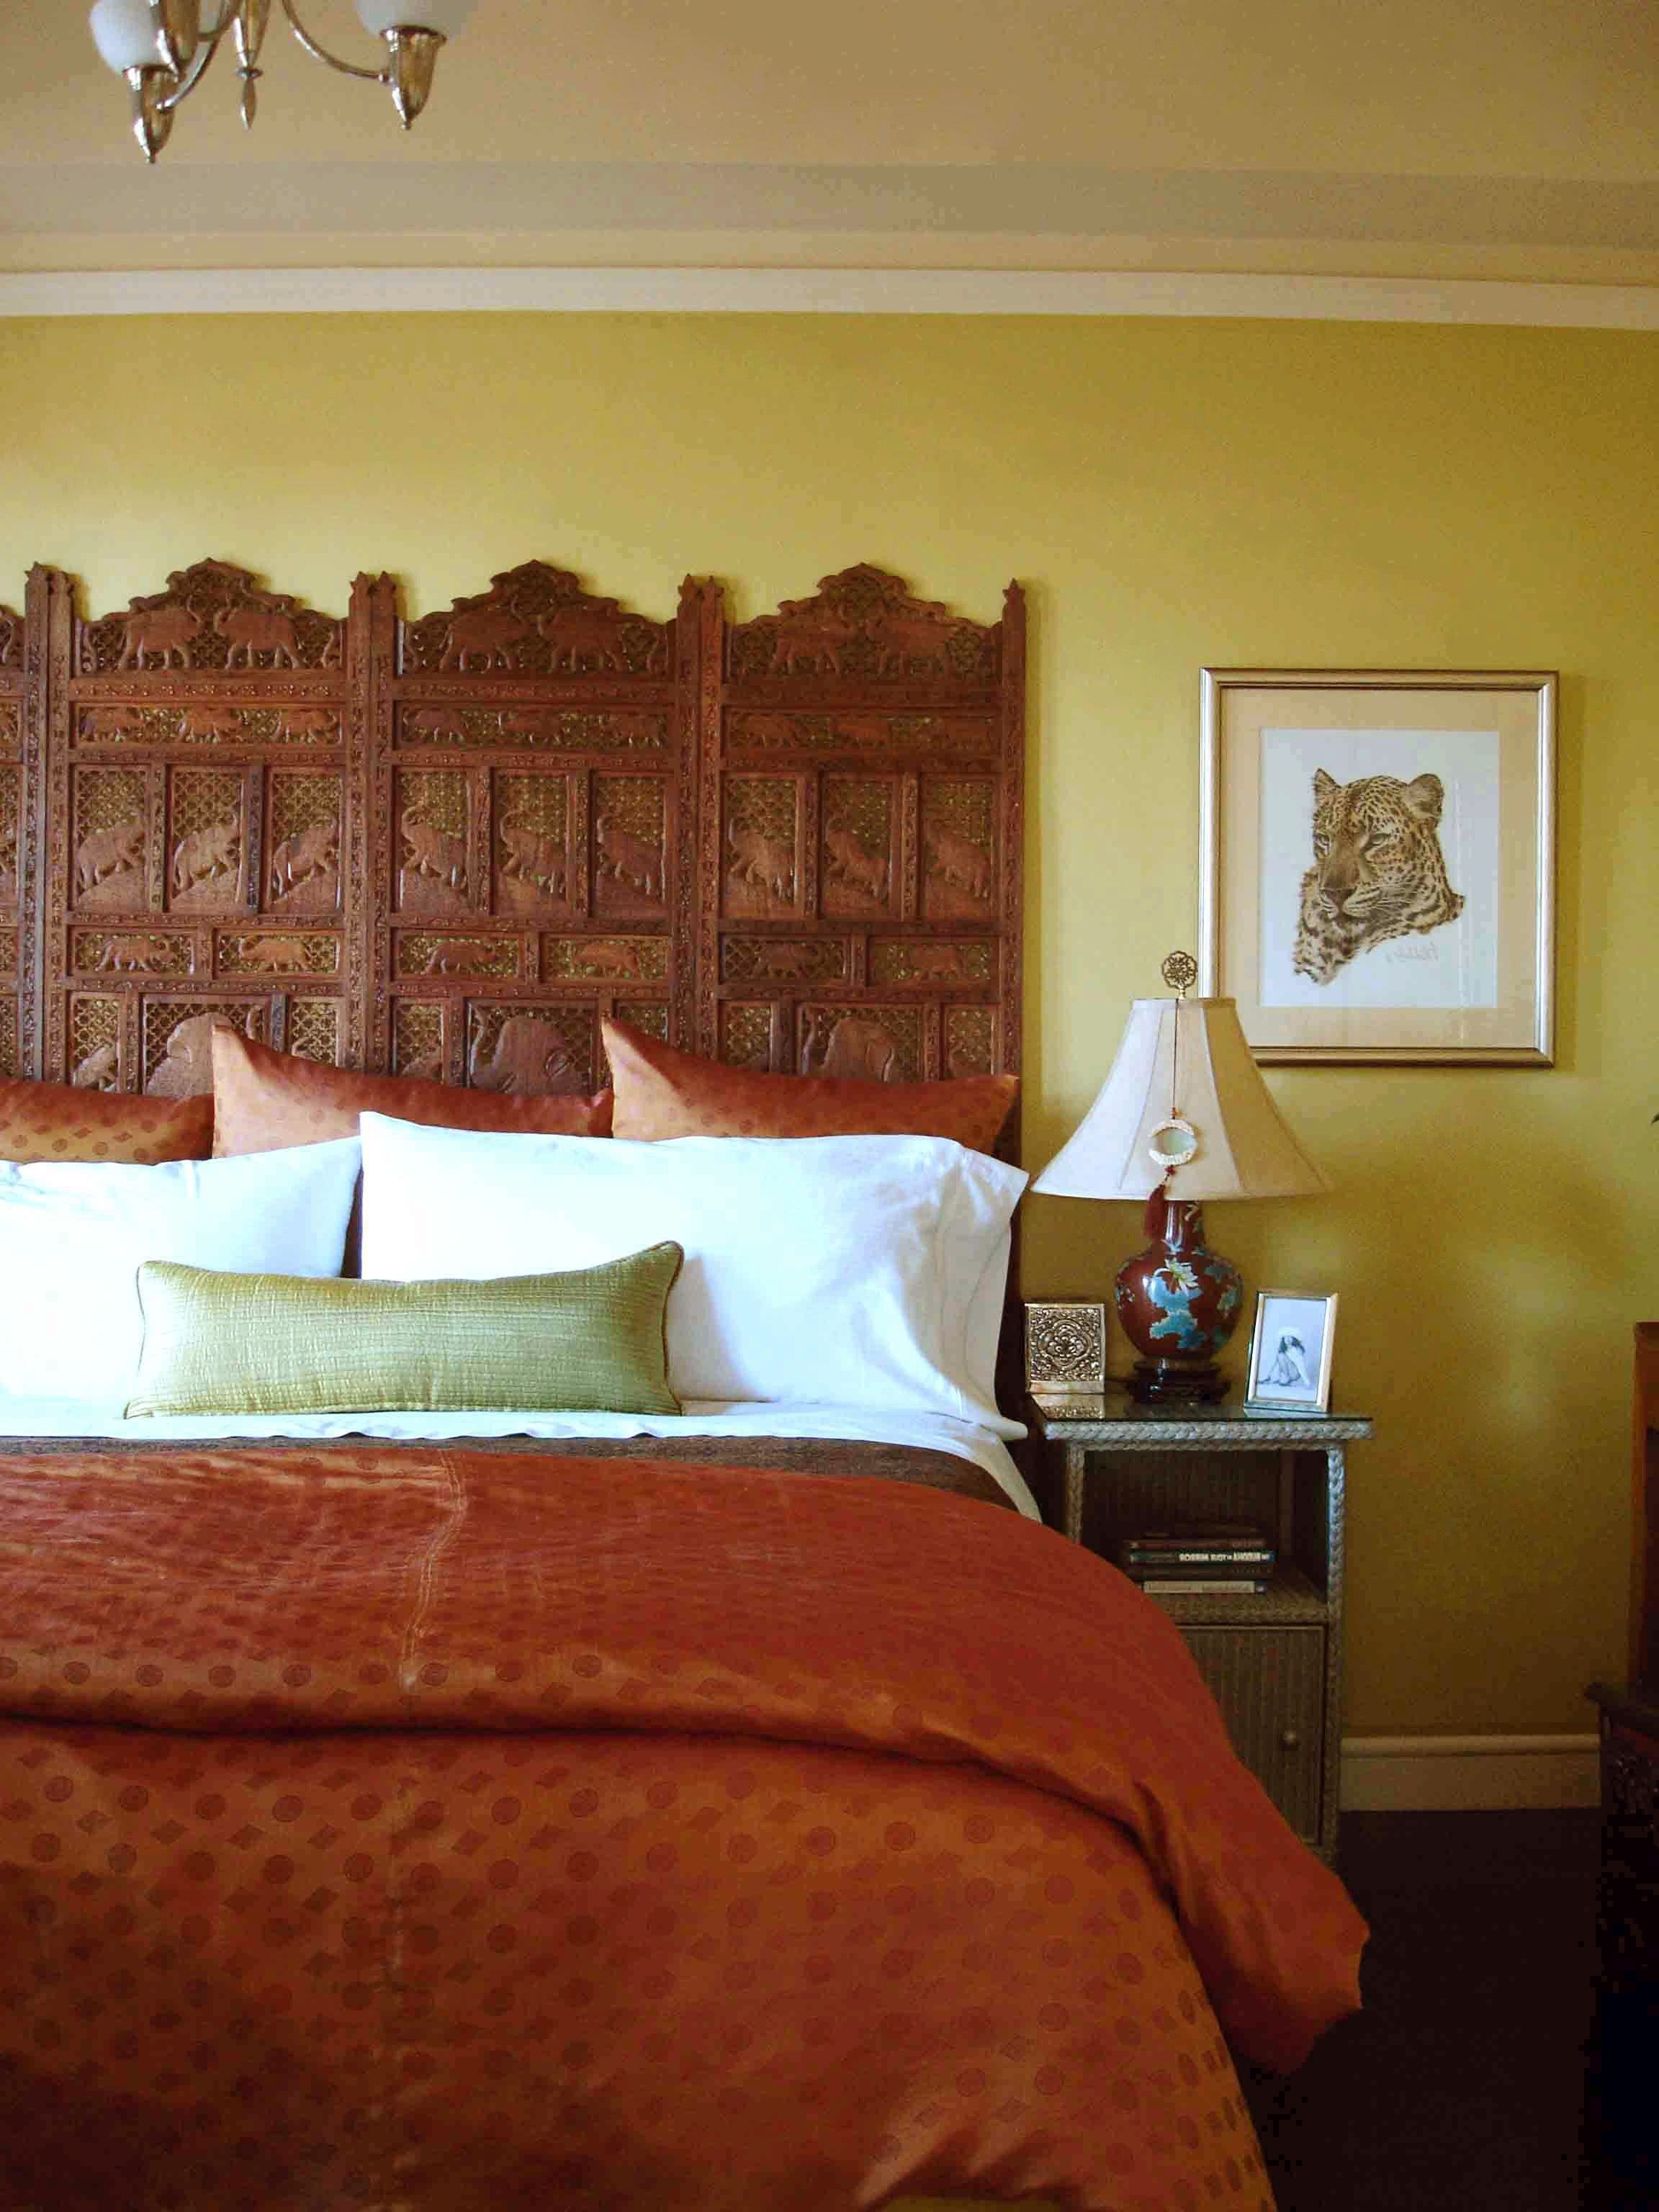 Vintage Indian Bedroom Design With Carved Wooden Screen As A Headboard (View 29 of 30)